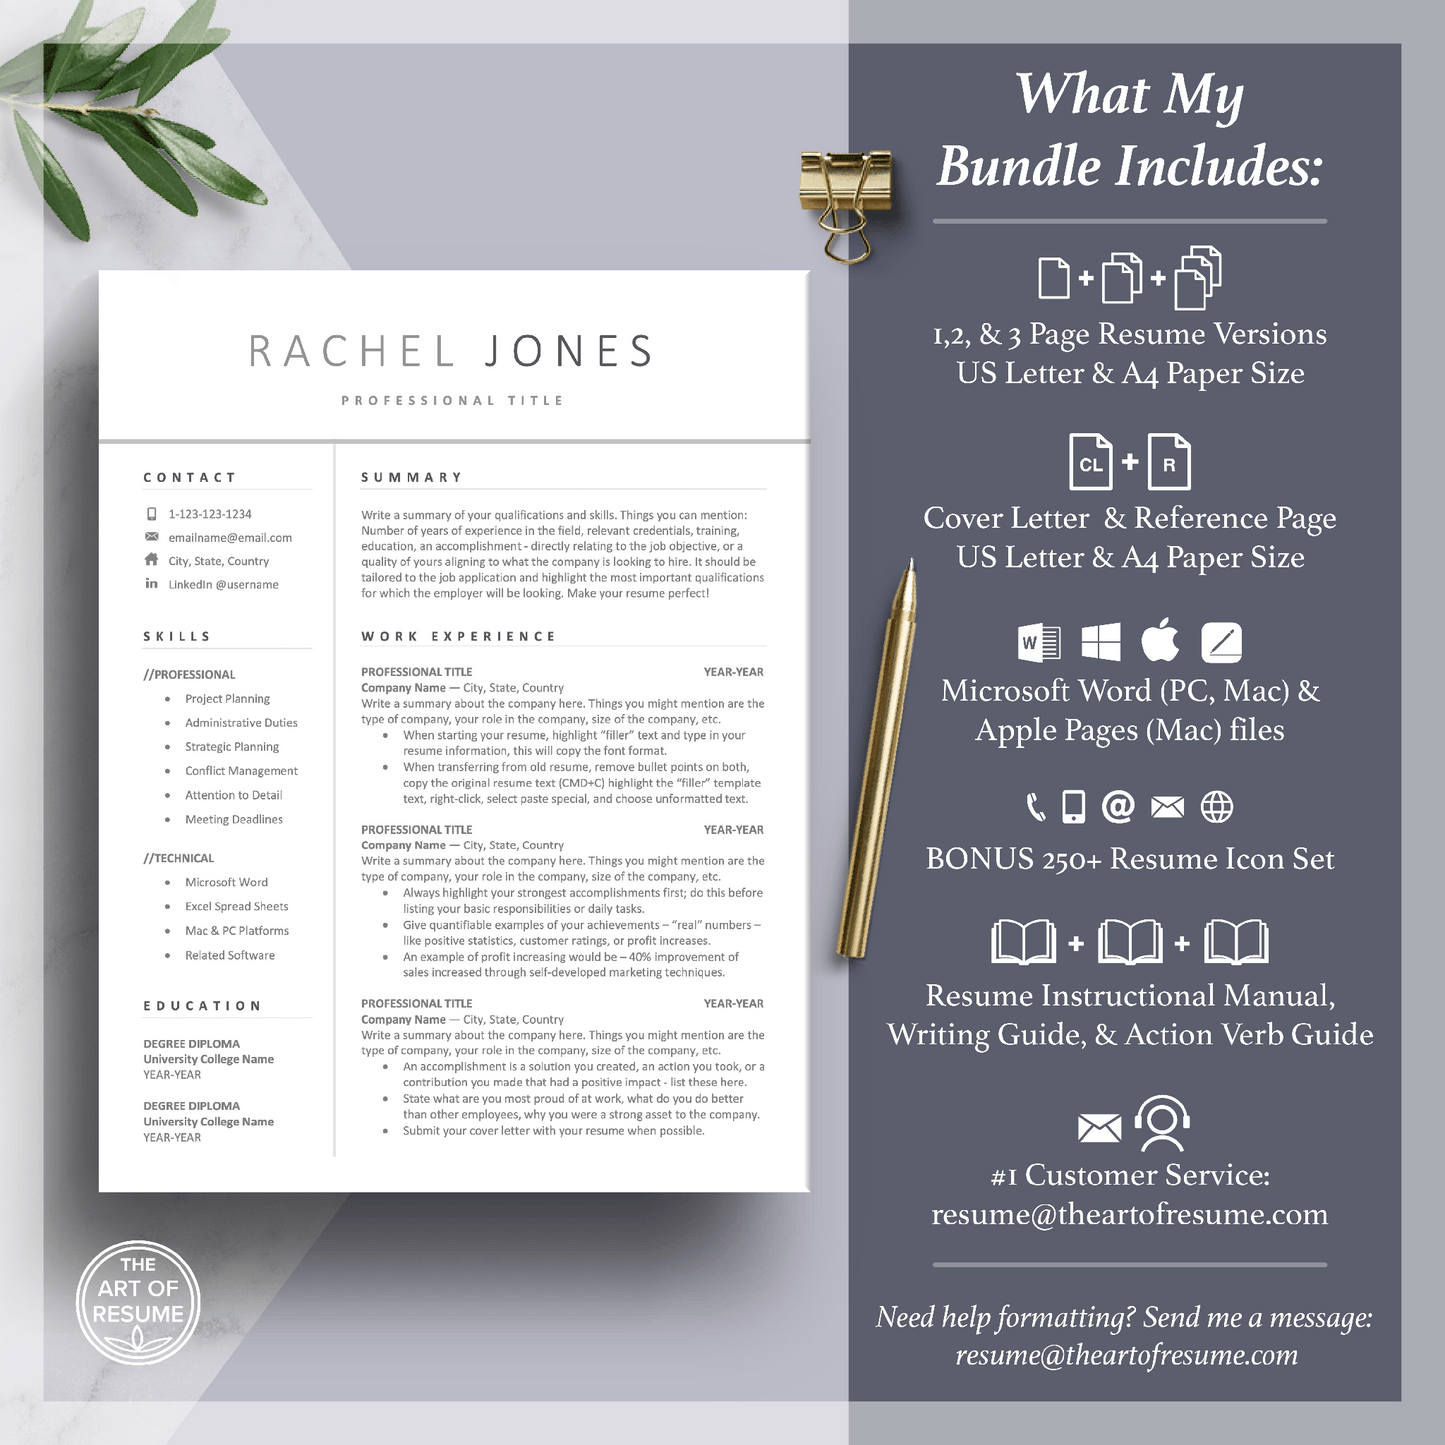 Simple Resume Template | Professional Resume for Any Career - Student CV - The Art of Resume